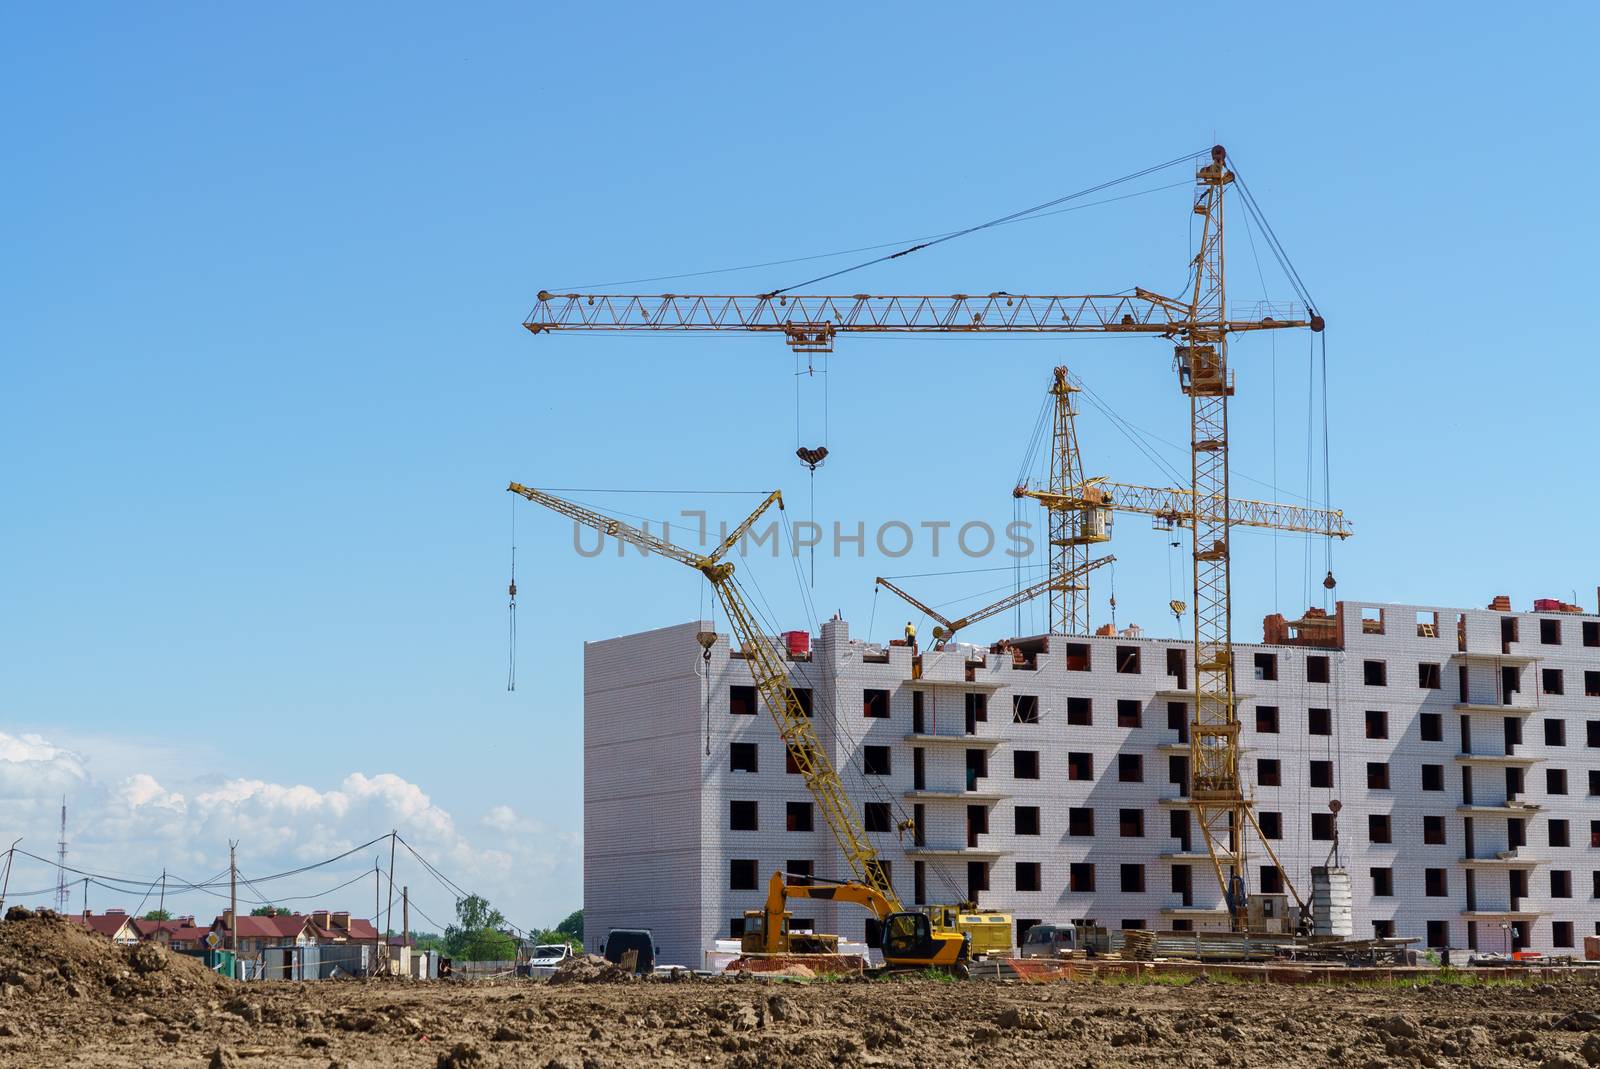 The construction of a multistory building. Construction cranes are on the building site